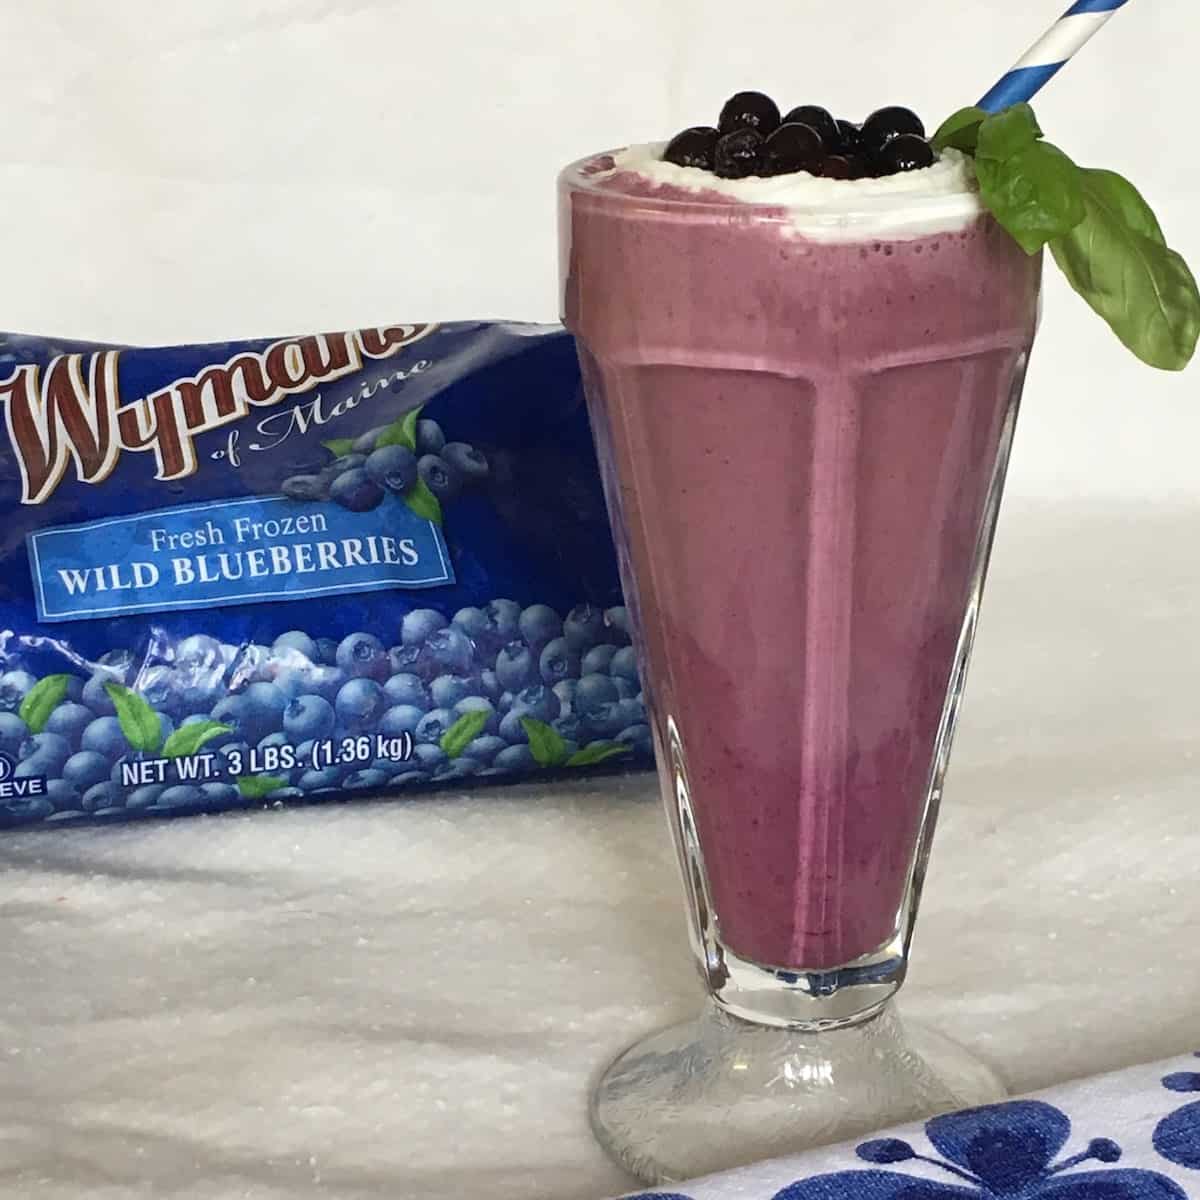 Wild blueberry smoothie with a straw and product package.